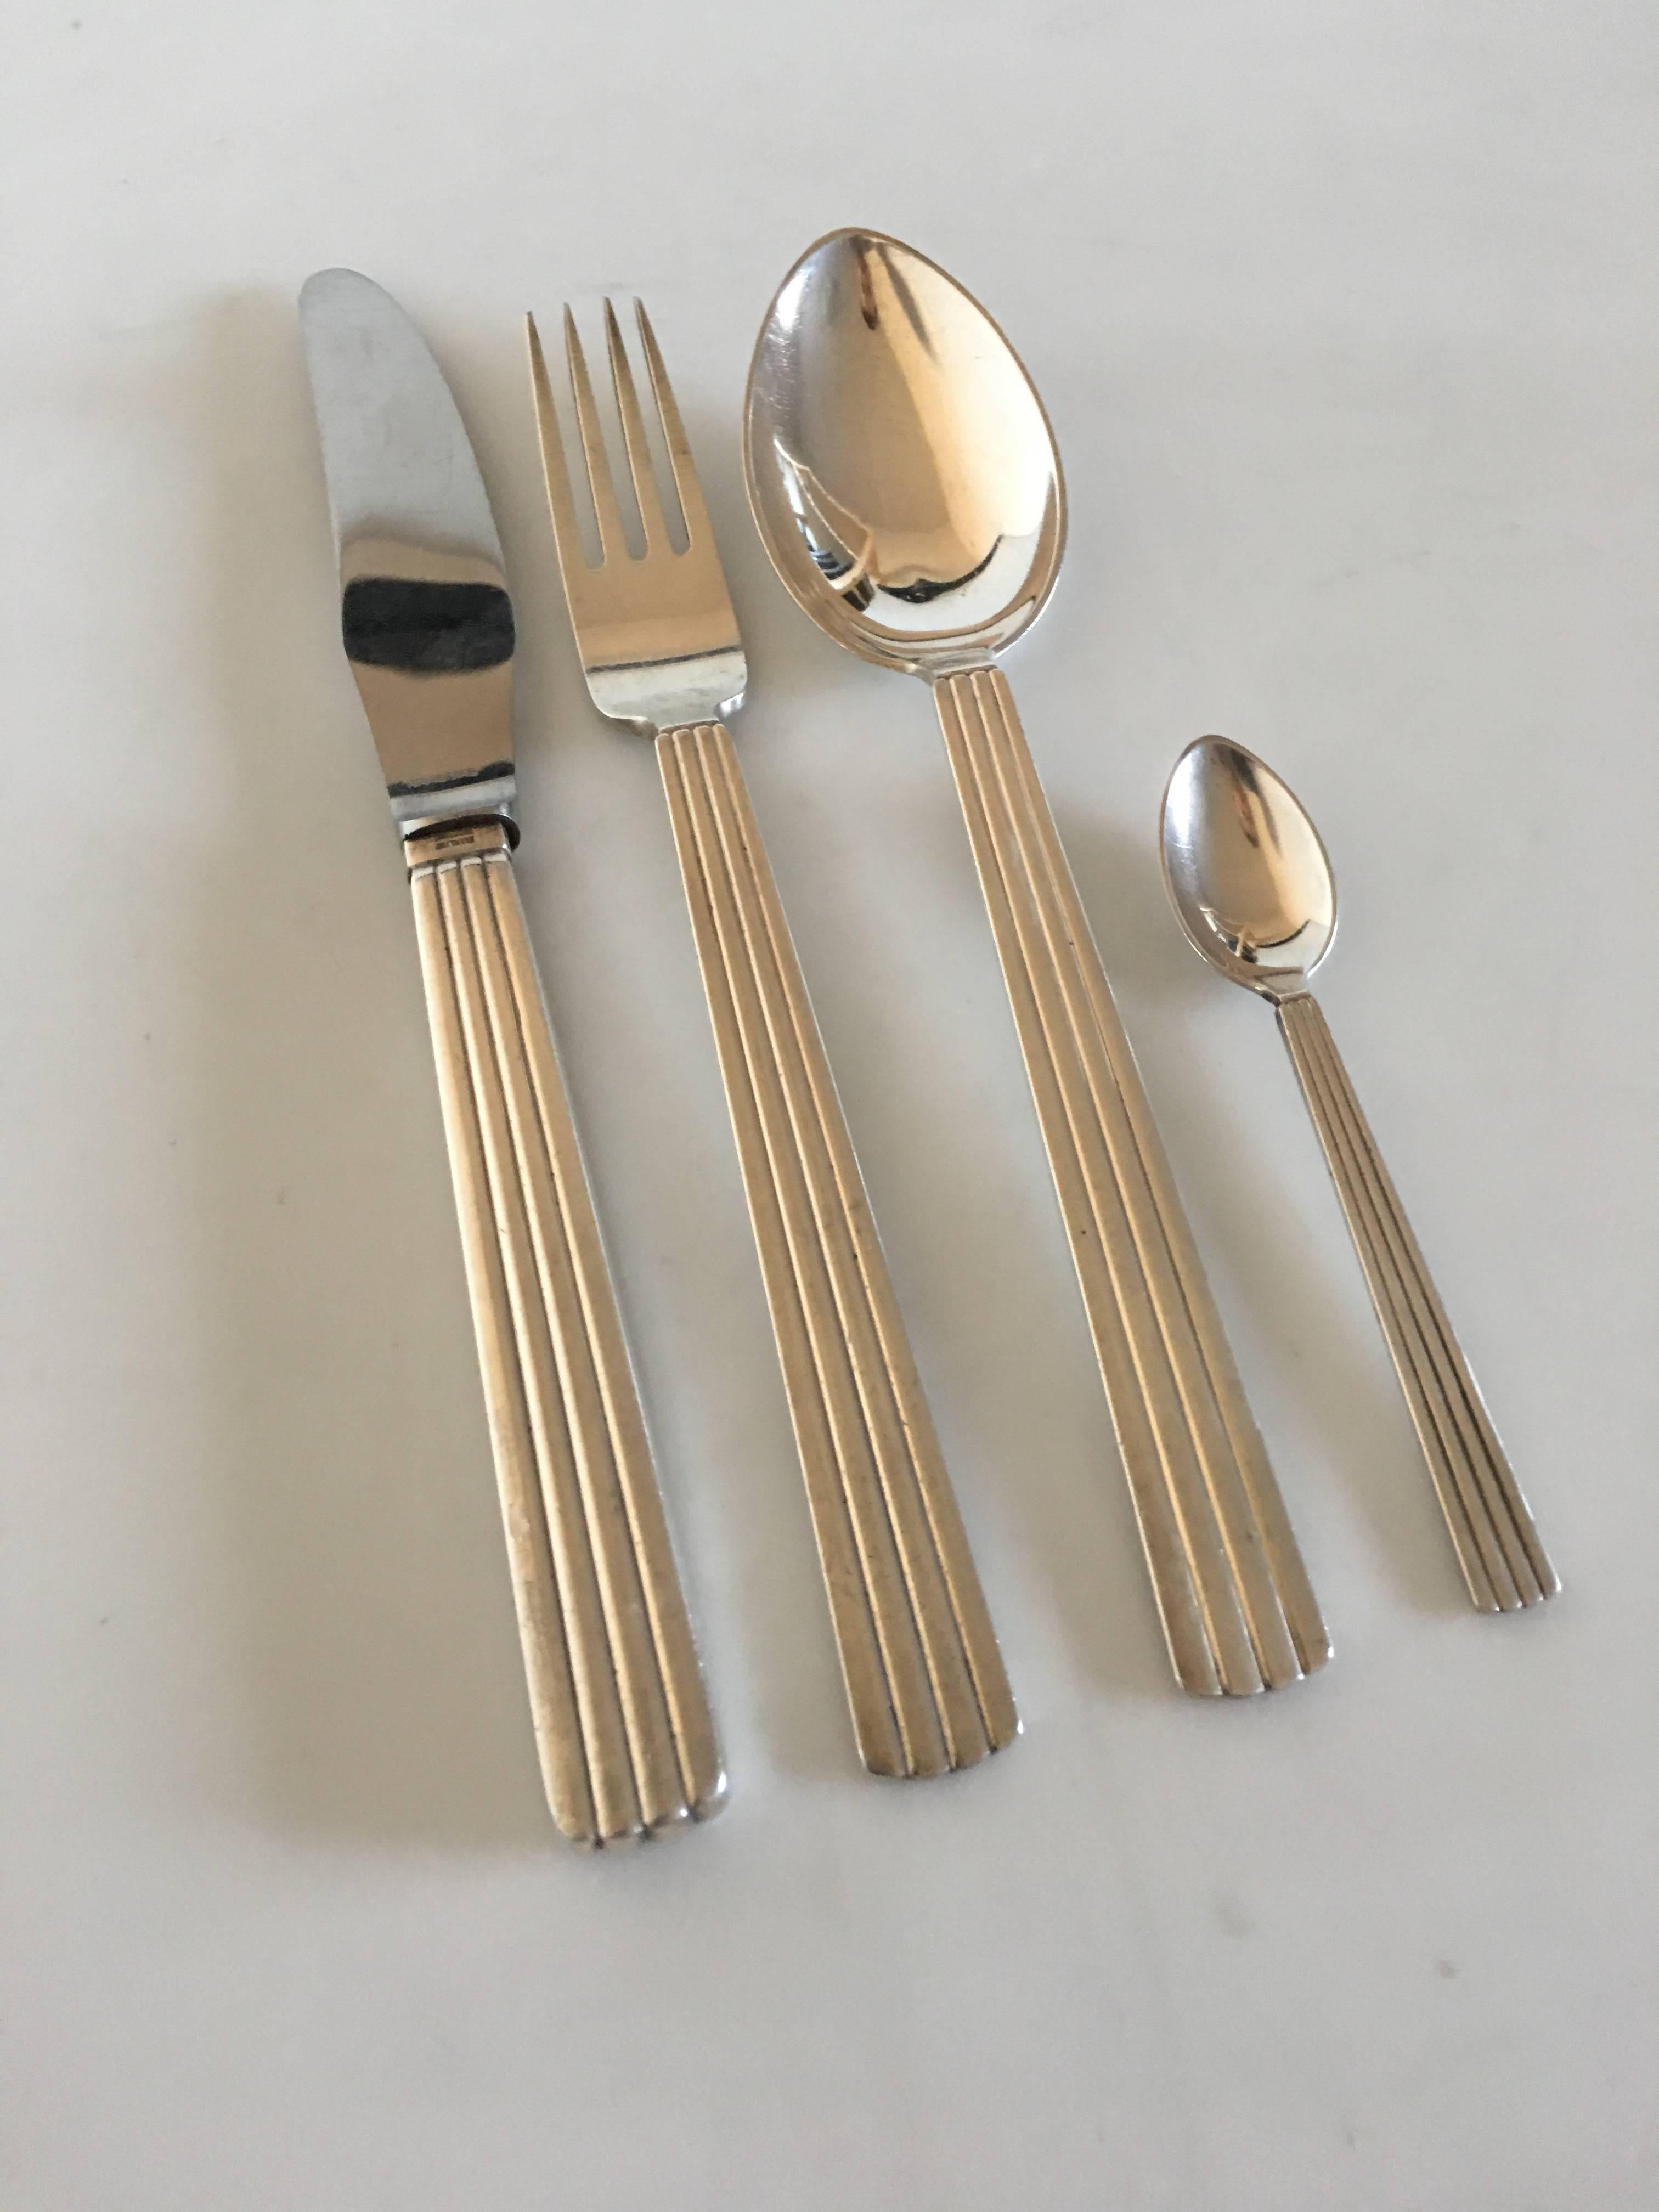 Georg Jensen sterling silver Bernadotte flatware set for 12 people. All pieces with marks from 1933-1945. The set consists of the following pieces: 

12 x dinner knives 21.5 cm L (8 15/32